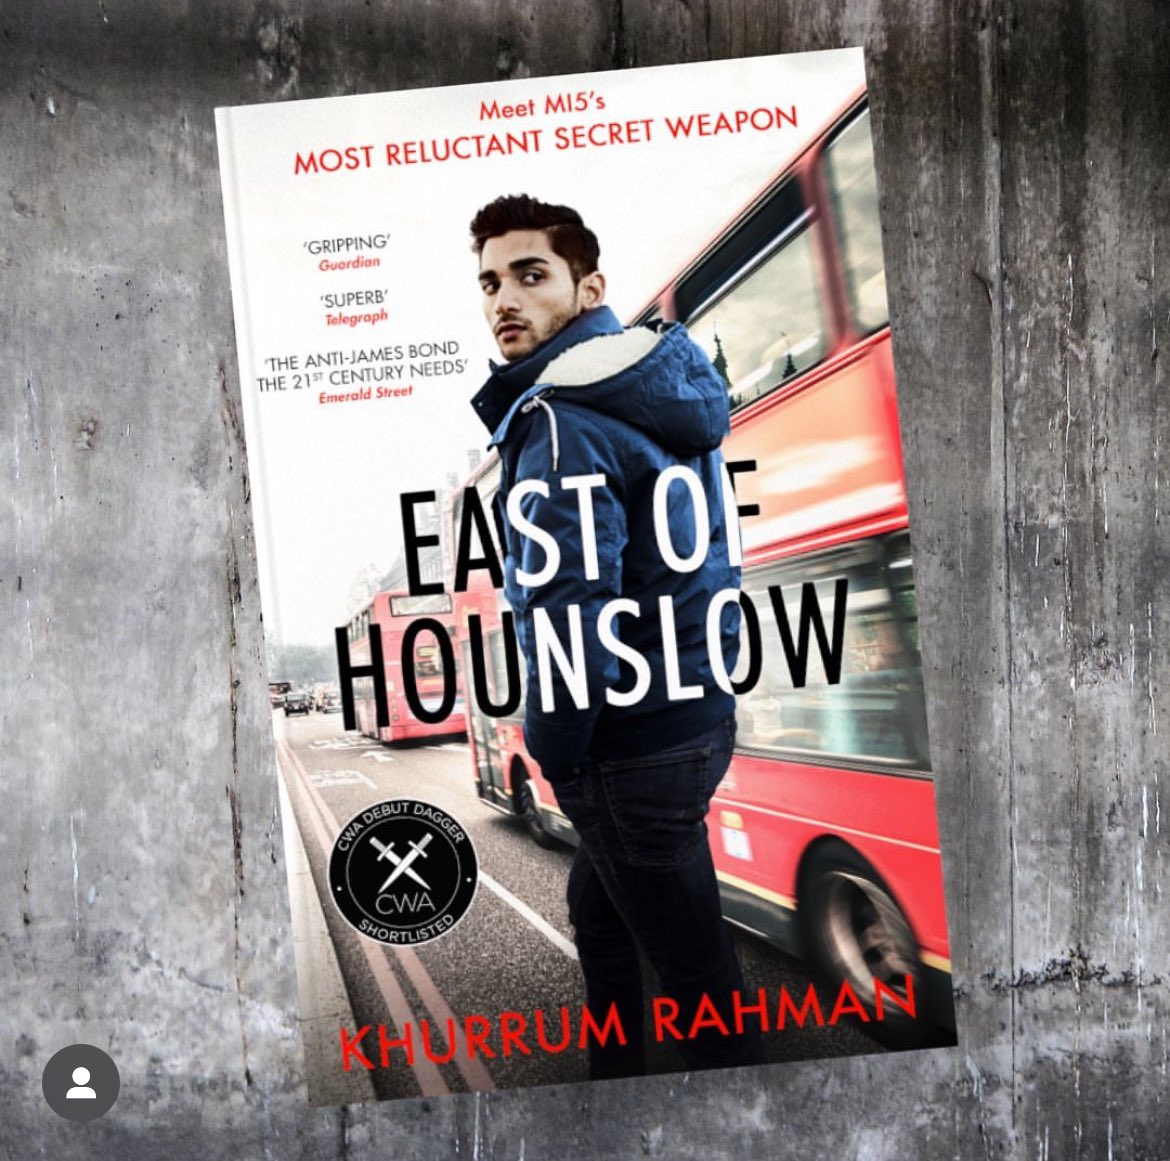 Meet Jay. Small-time dealer. Accidental jihadist. The one man who can save us all? EAST OF HOUNSLOW by @khurrumrahmanauthor is the pulse-pounding spy thriller featuring MI5's most unlikely and hilarious new hero Jay Qasim. I’m going to start re reading #JayQasim series today.